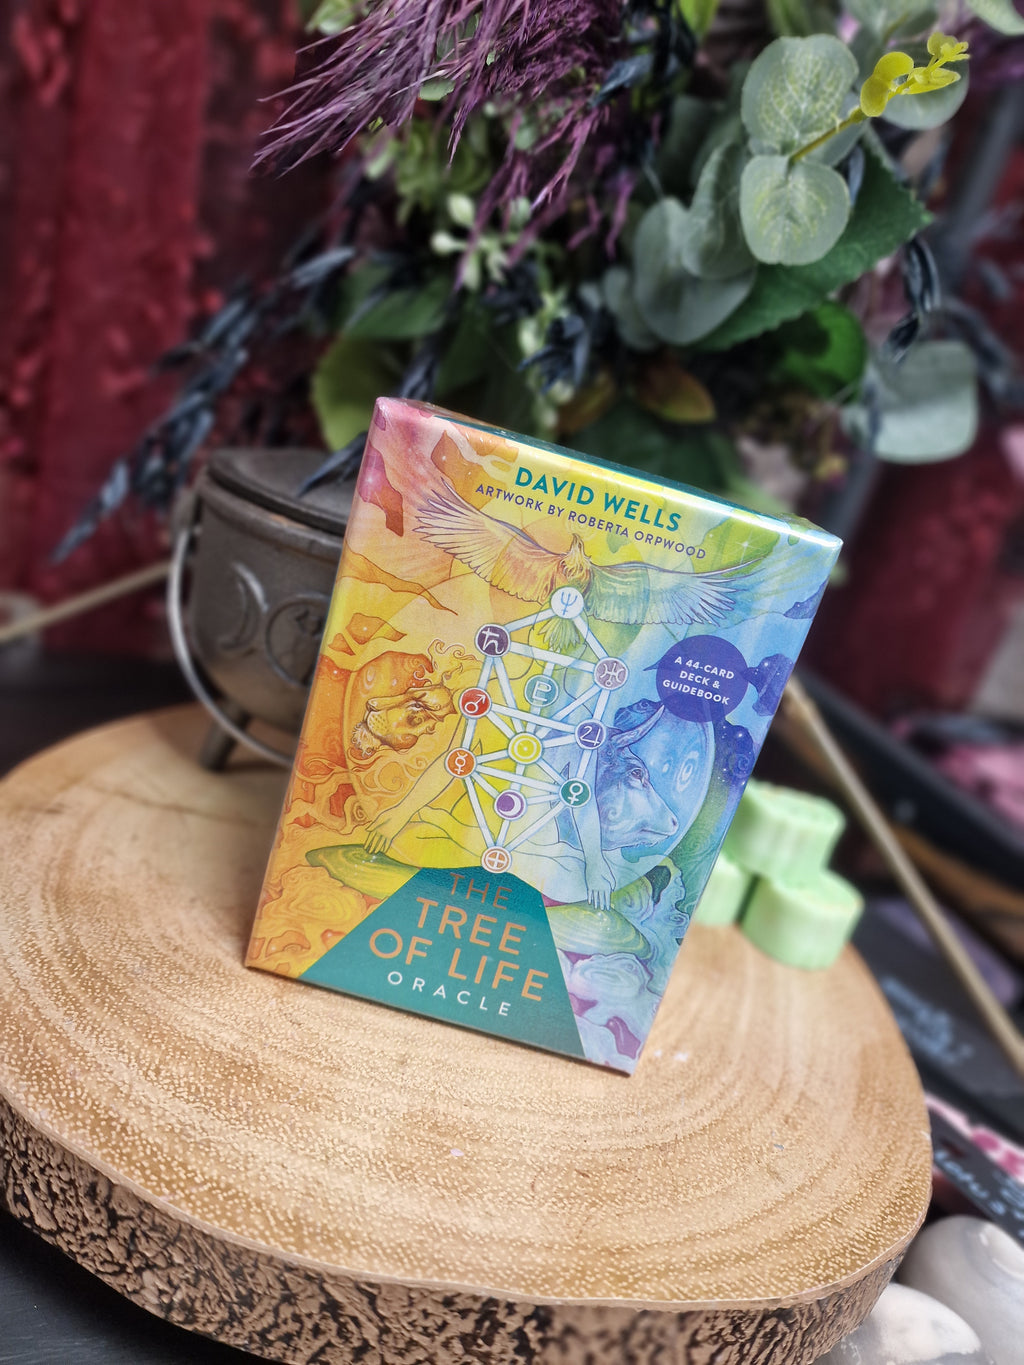 Tree of life Oracle cards